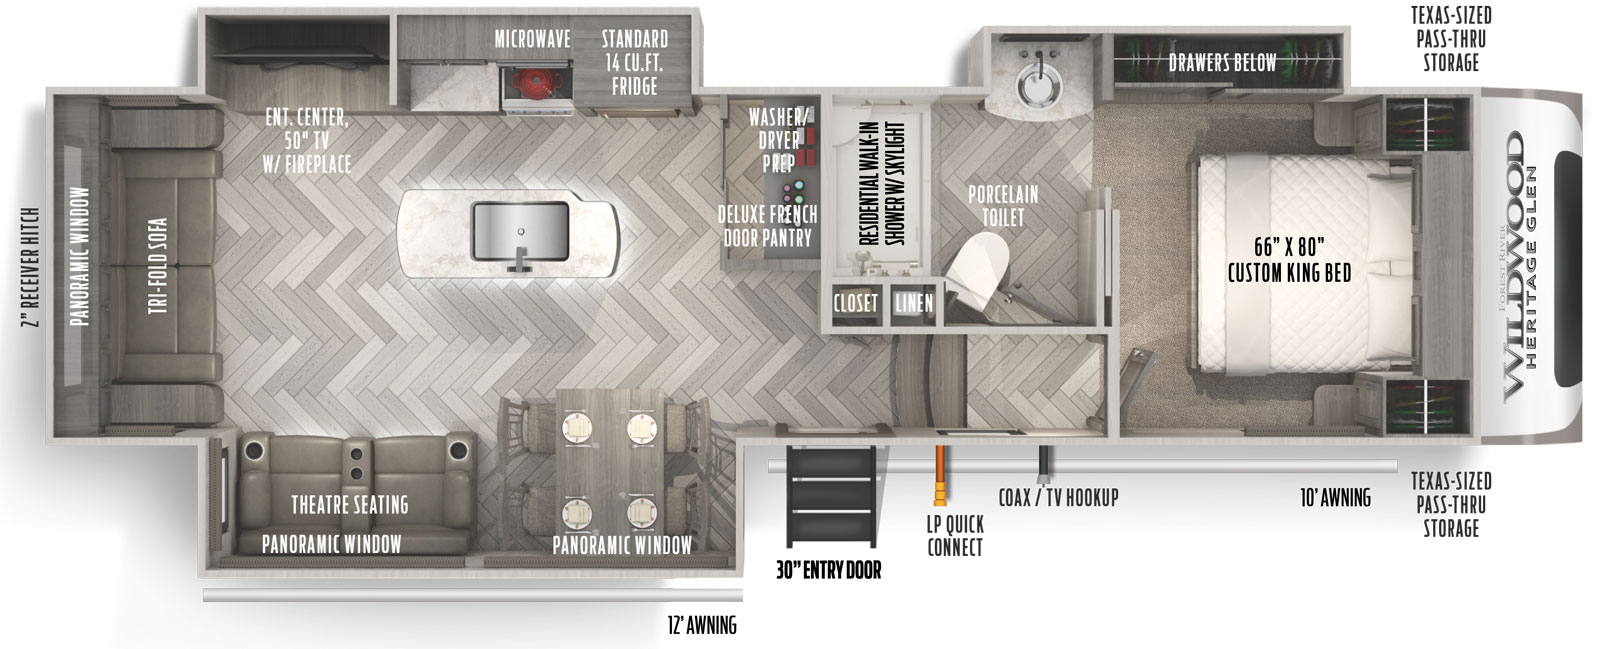 Heritage Glen 290RL floorplan. The 290RL has 3 slide outs and one entry door.